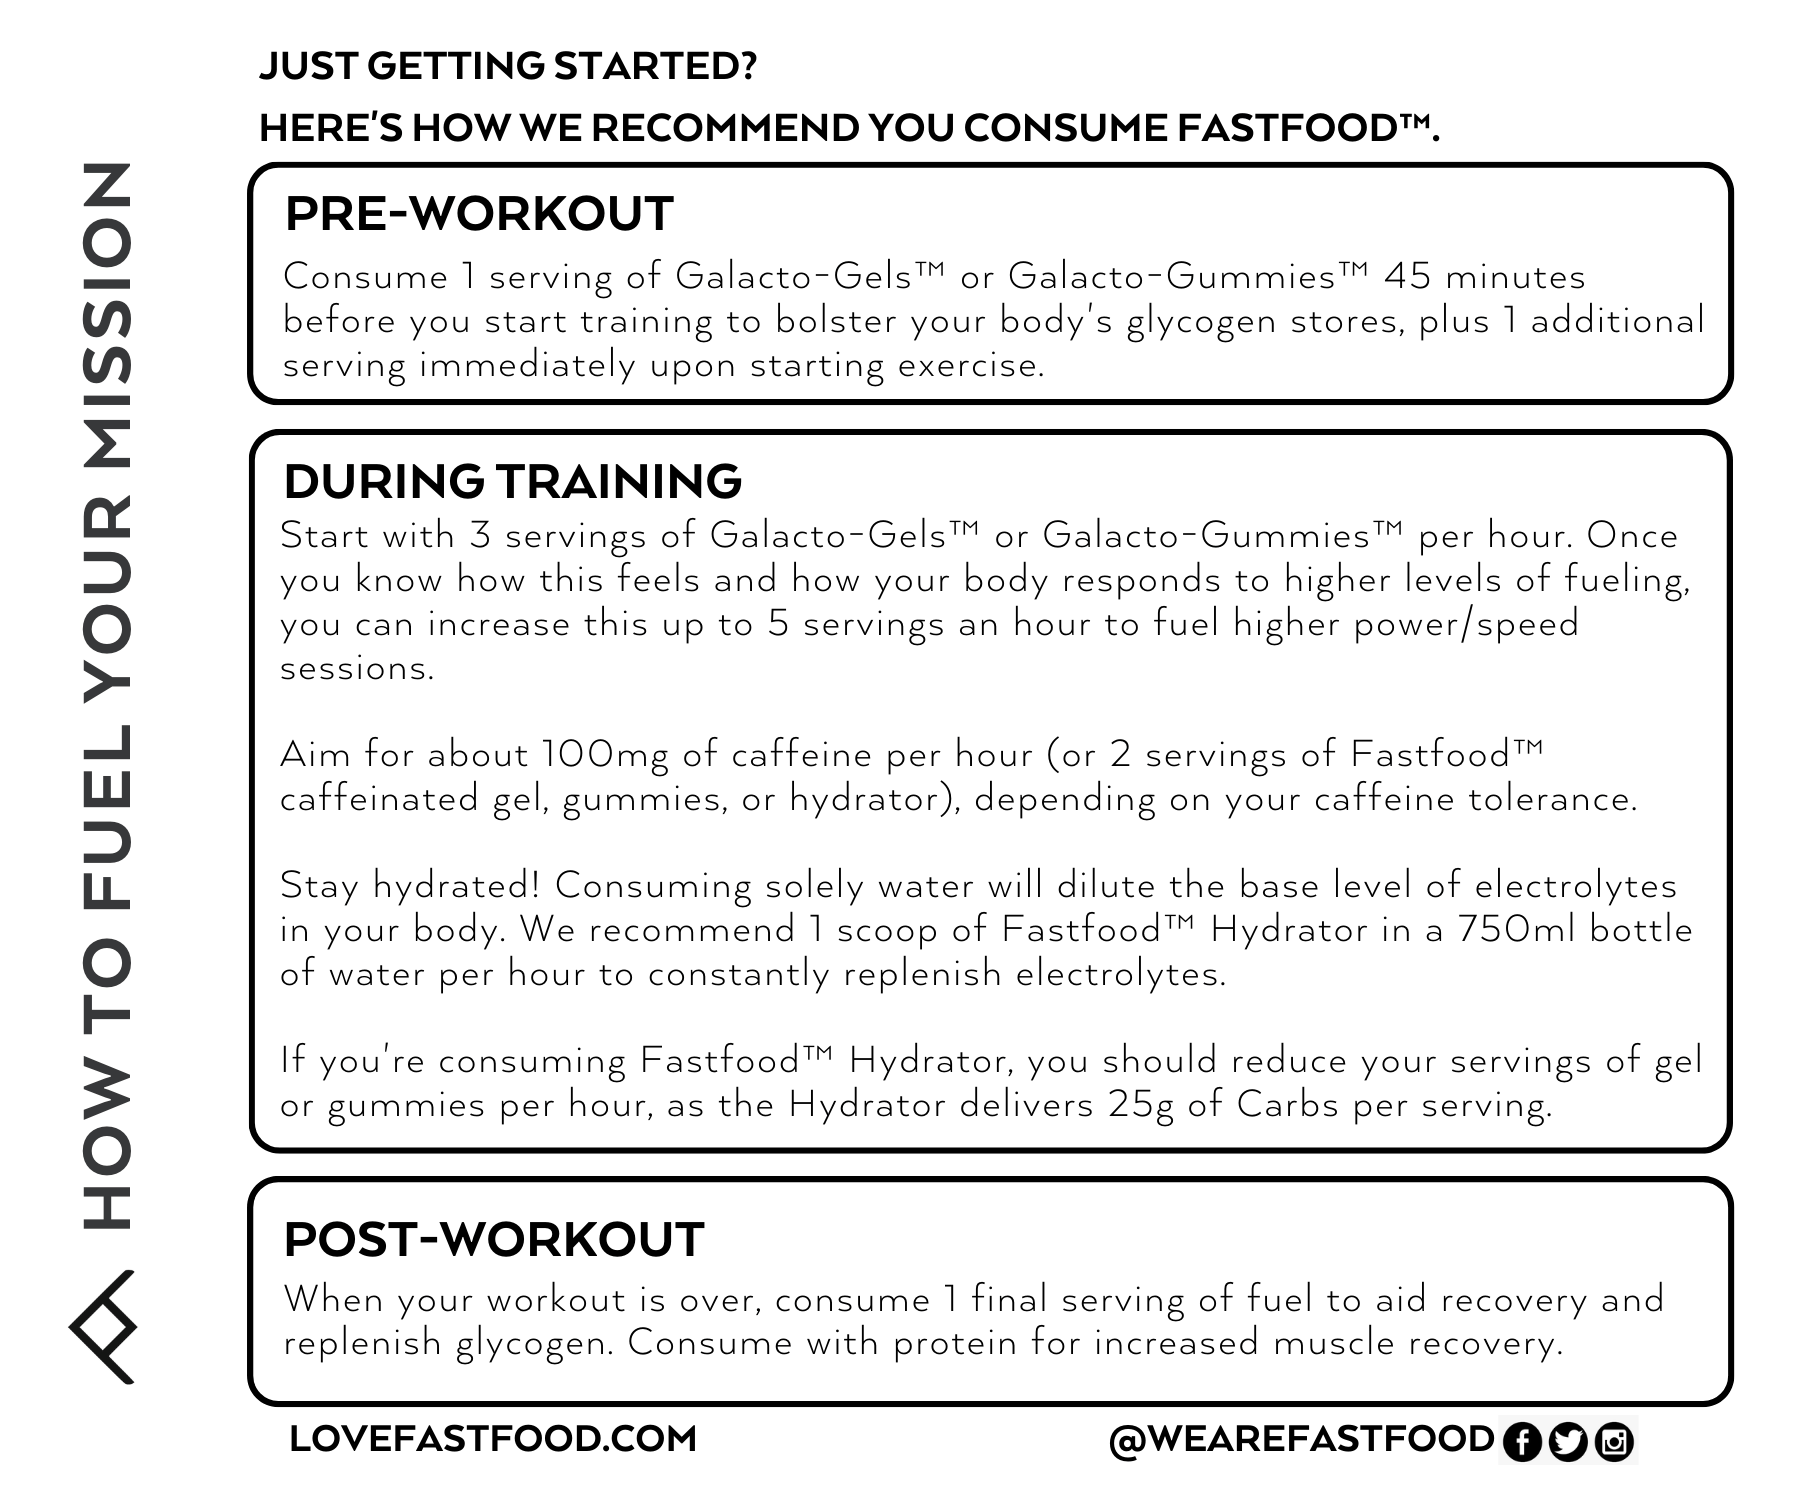 Galacto-Gummies™️ - Fastfood- how to use during training 